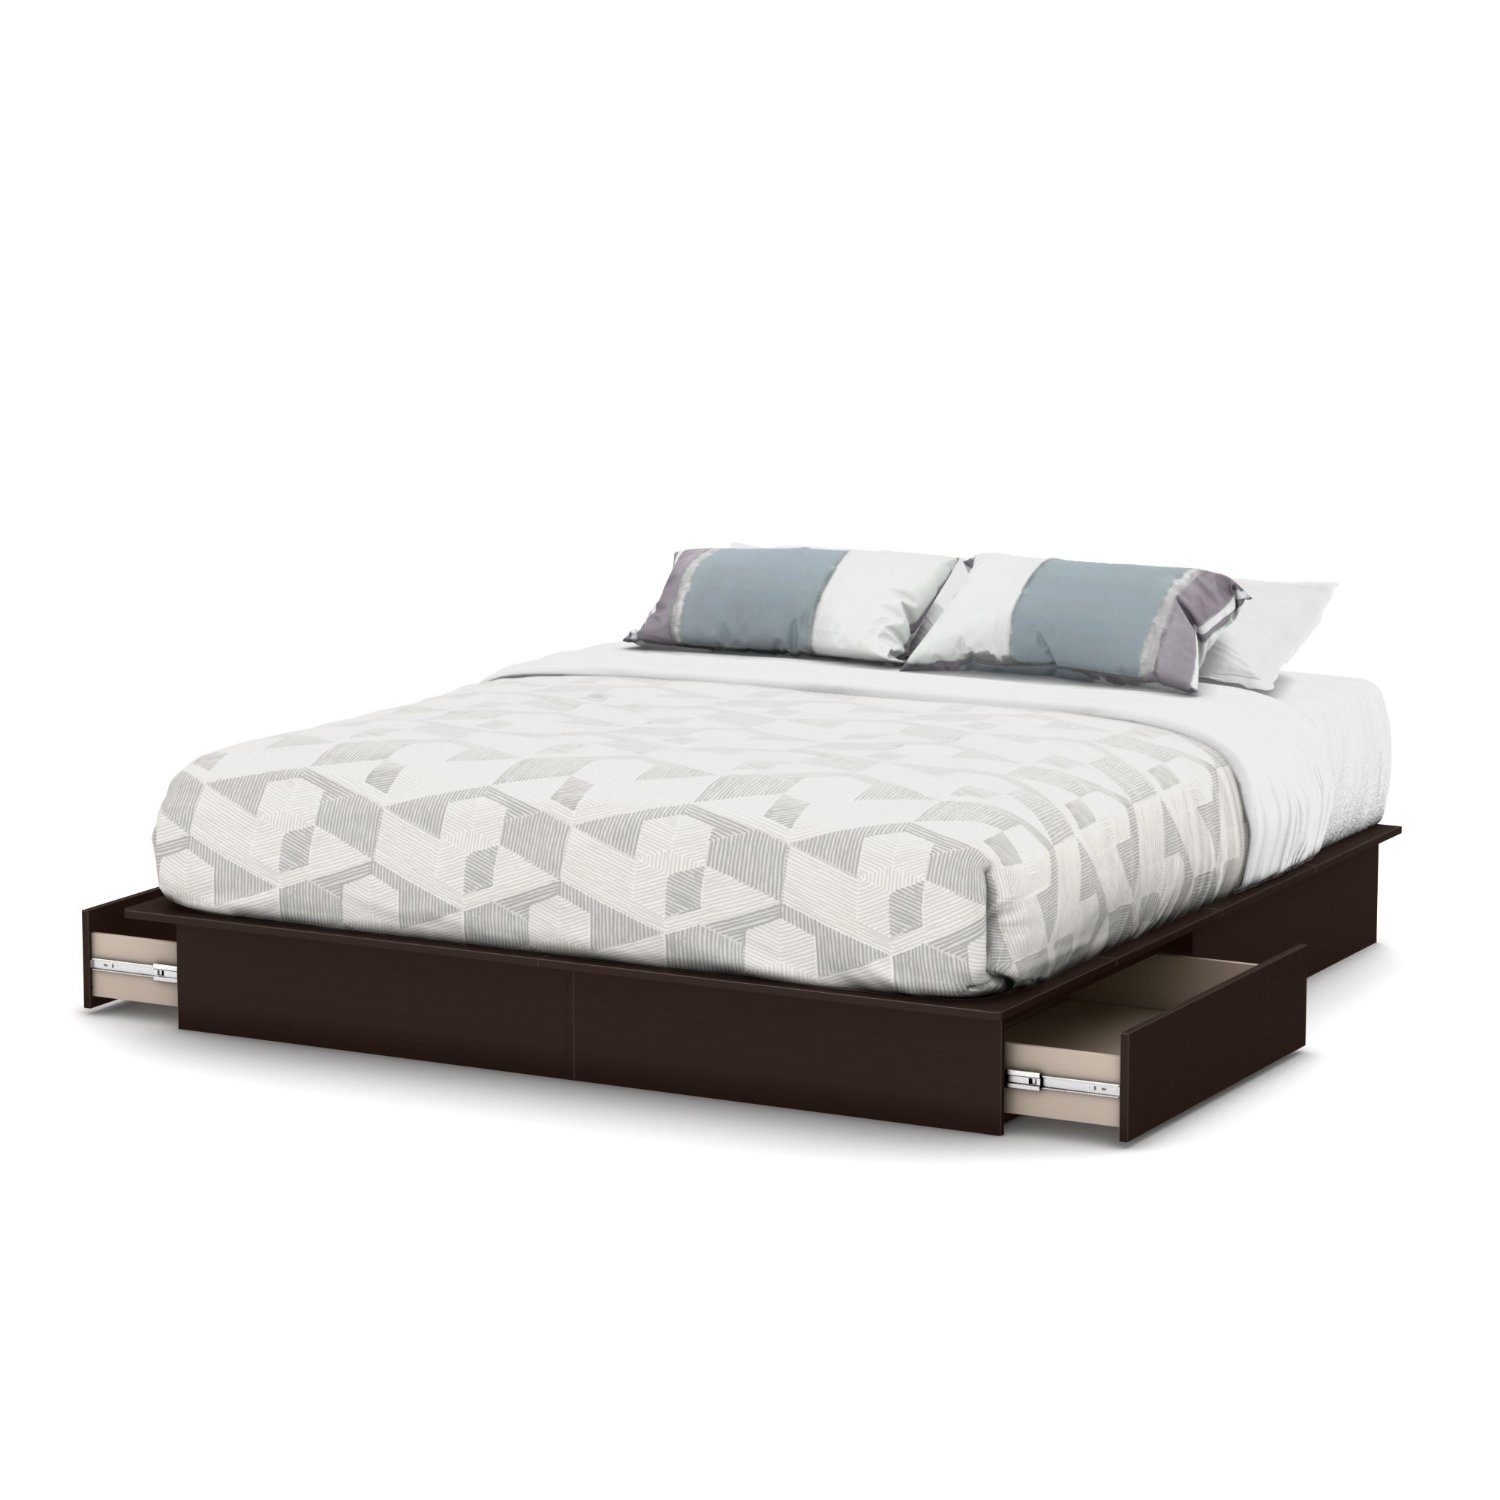 King size Modern Platform Bed with 2 Storage Drawers in Chocolate | eBay